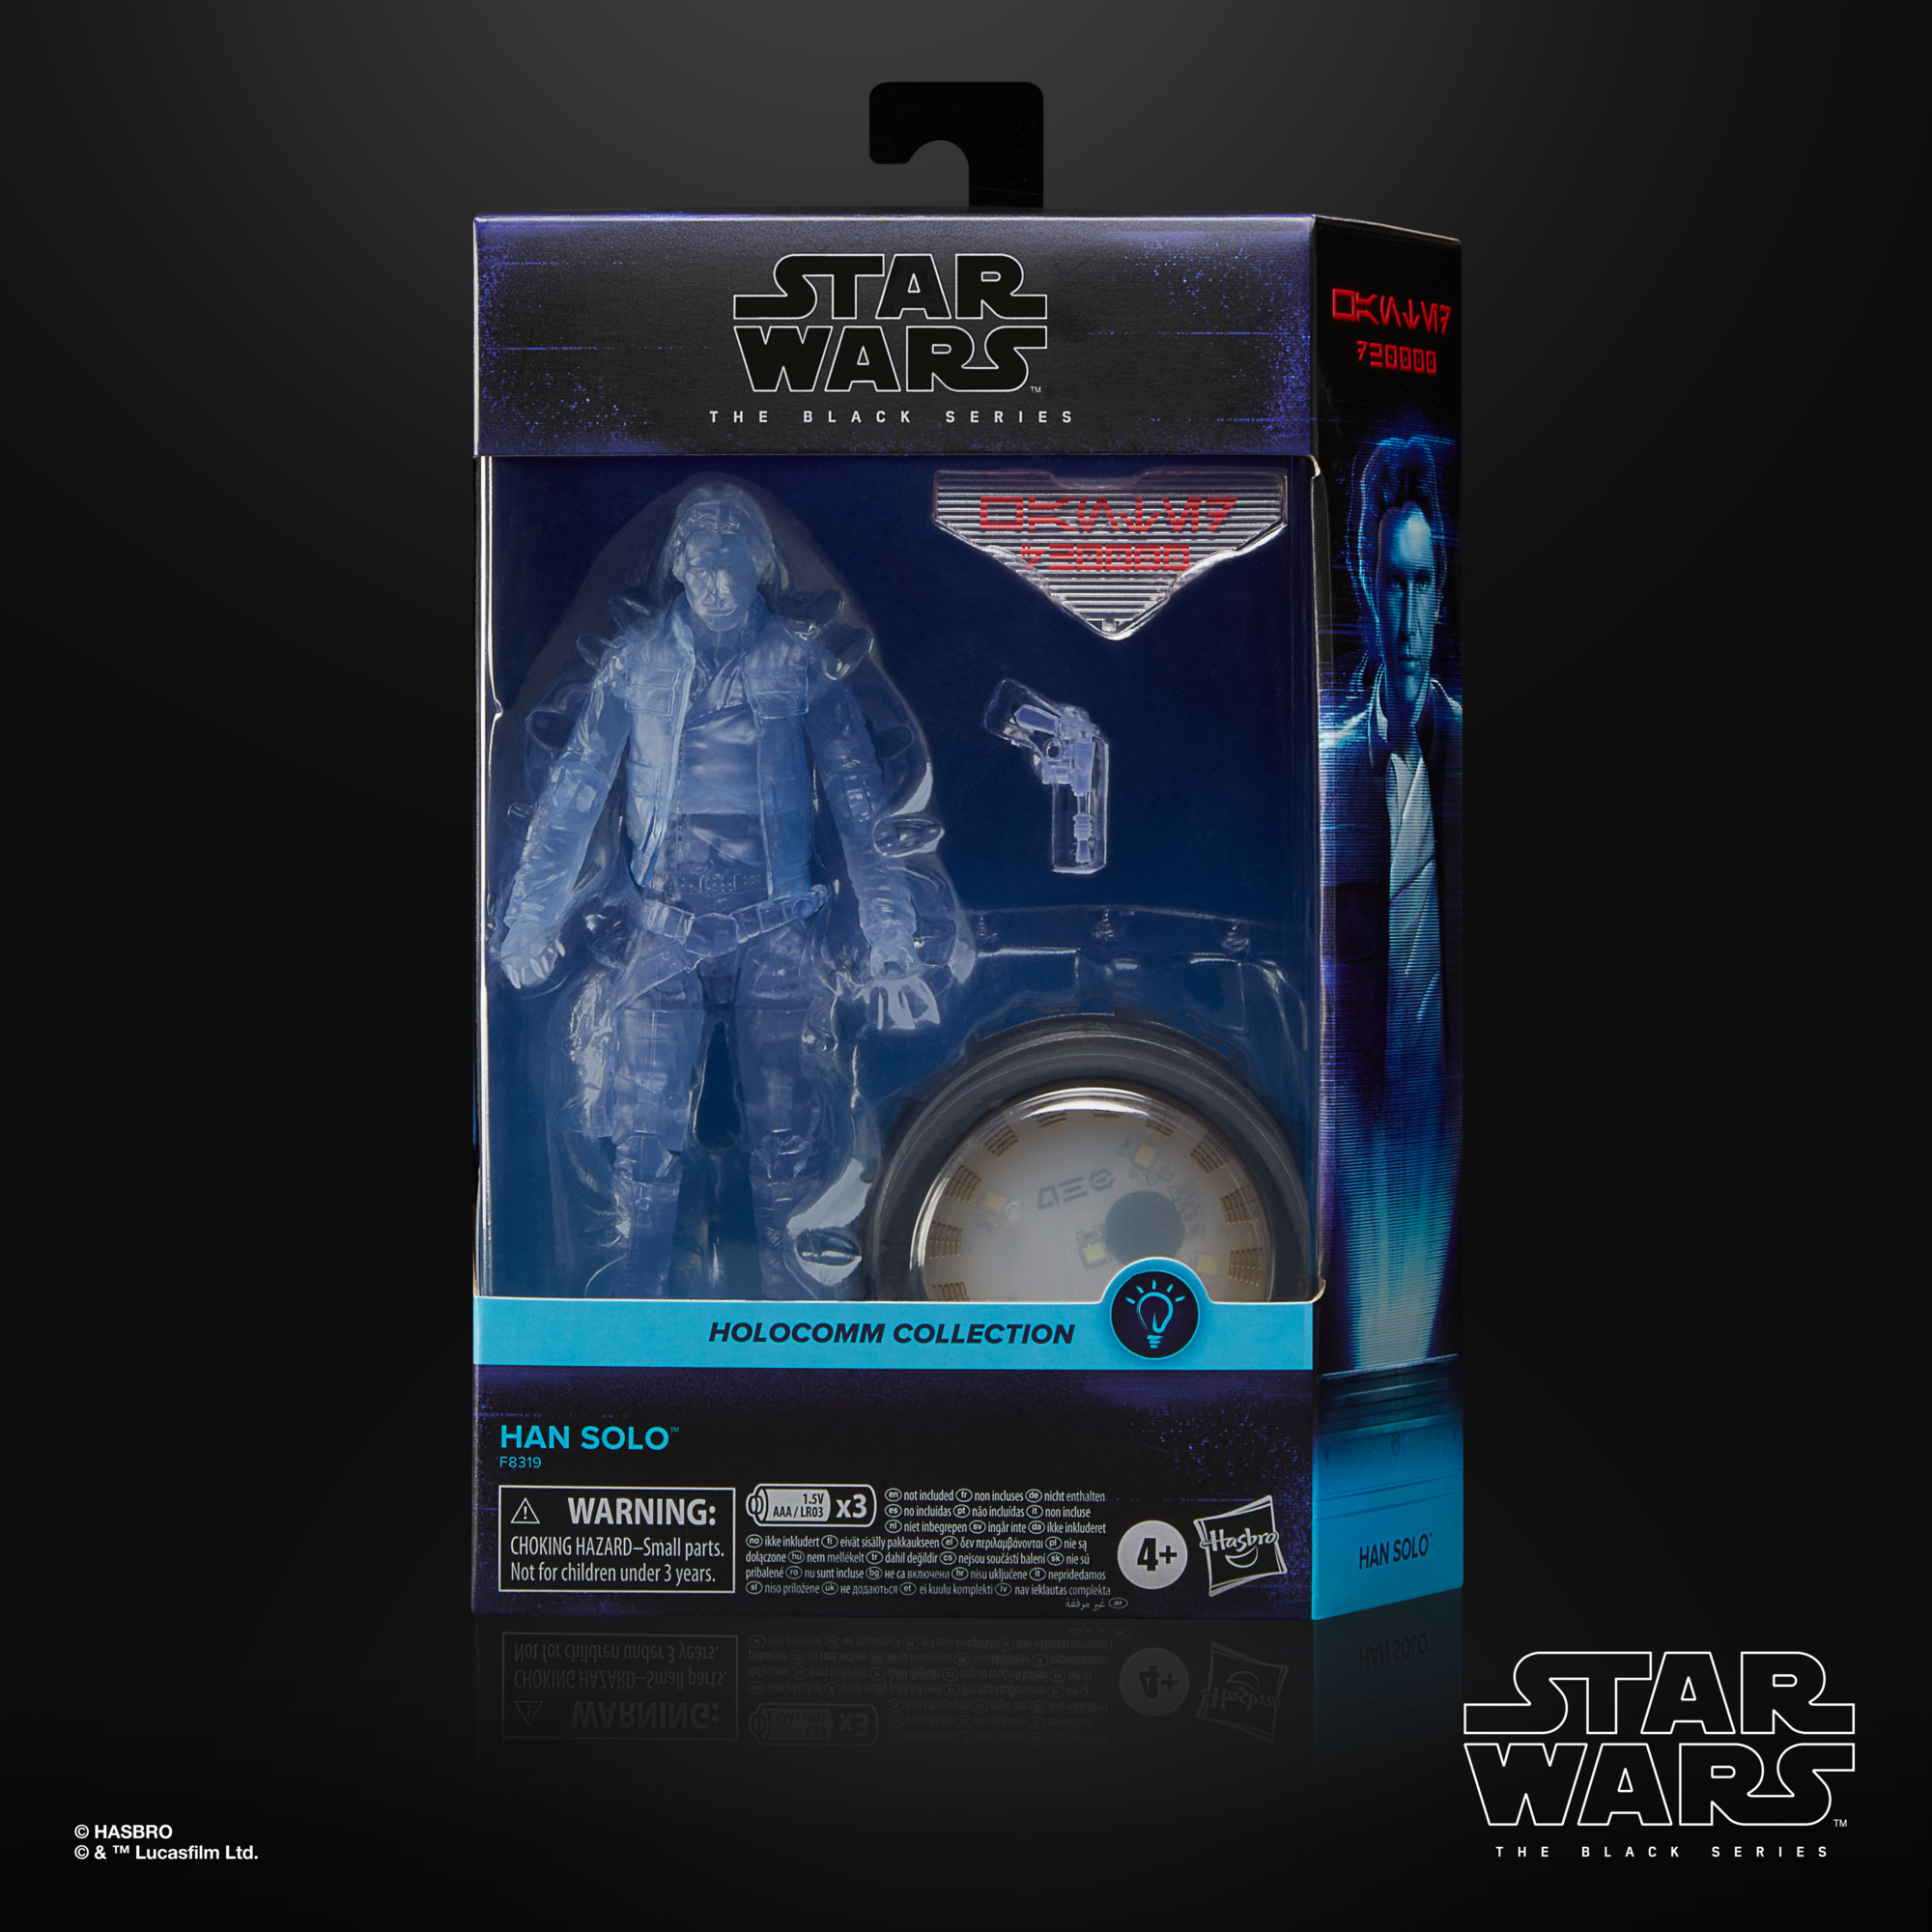 Star Wars The Black Series Holocomm Collection Han Solo Action-Figur (15 cm)   F8319 